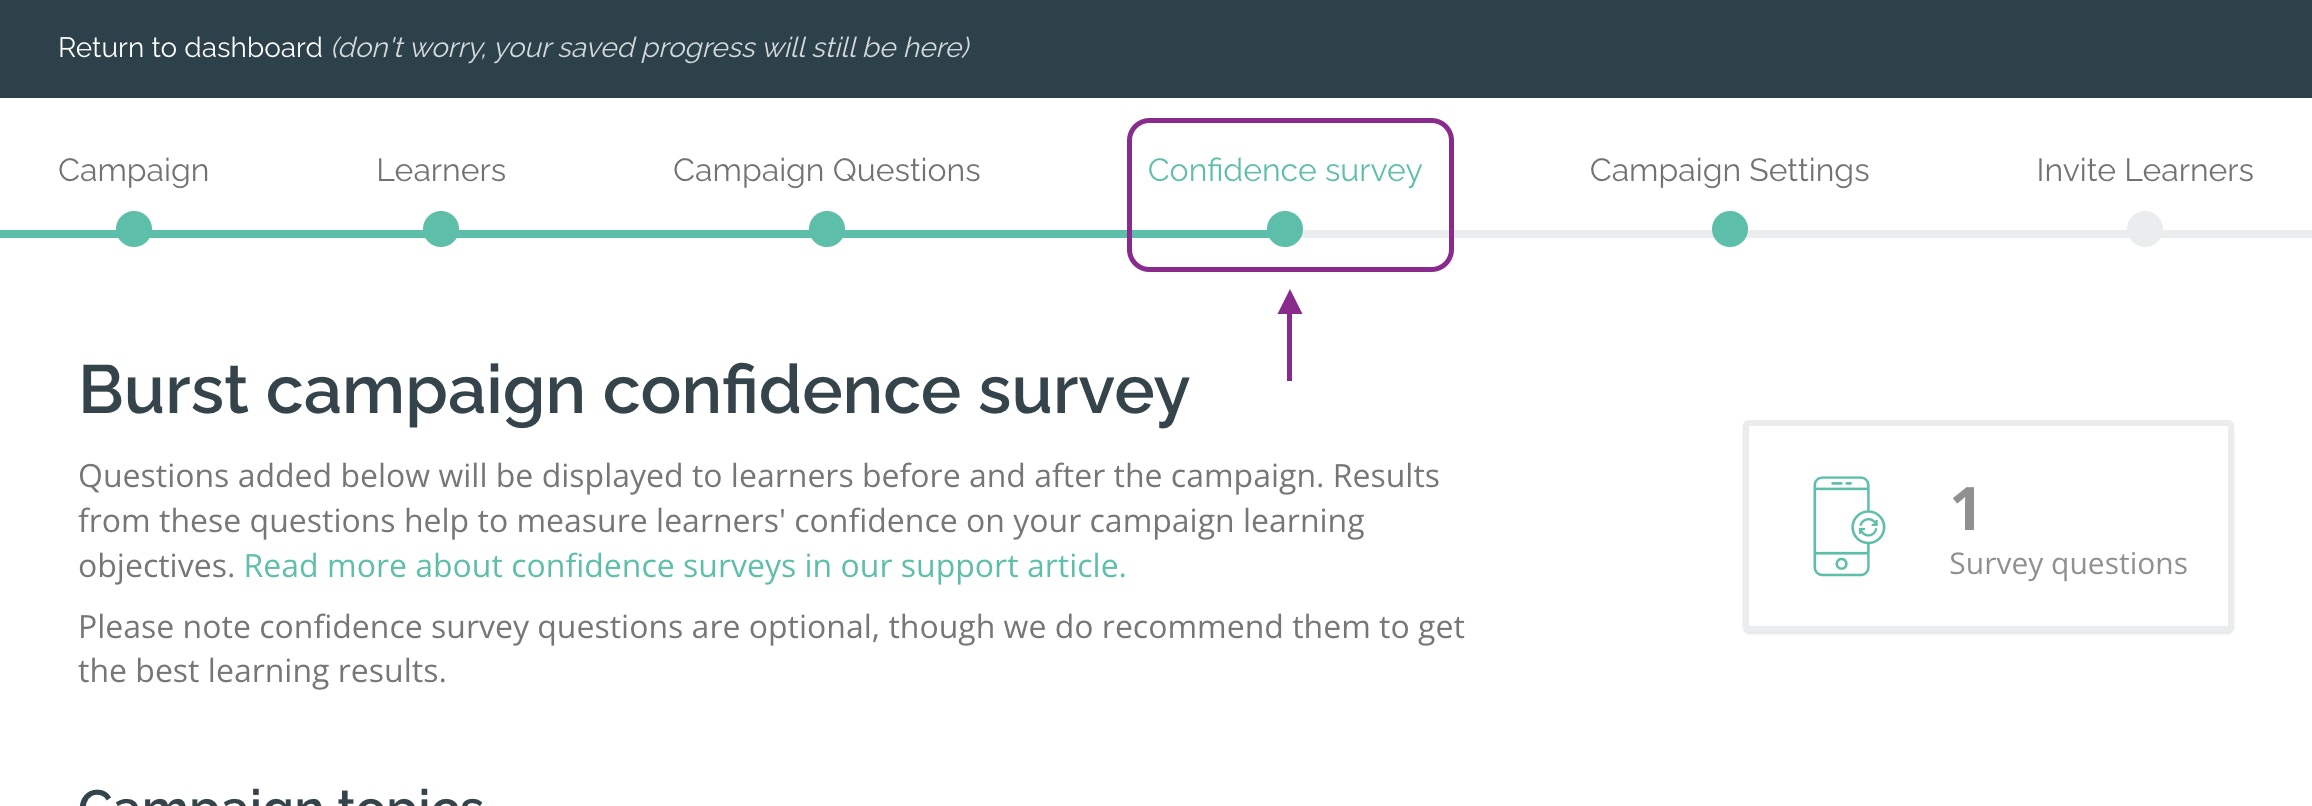 Campaign creation flow, with arrow pointing to confidence survey